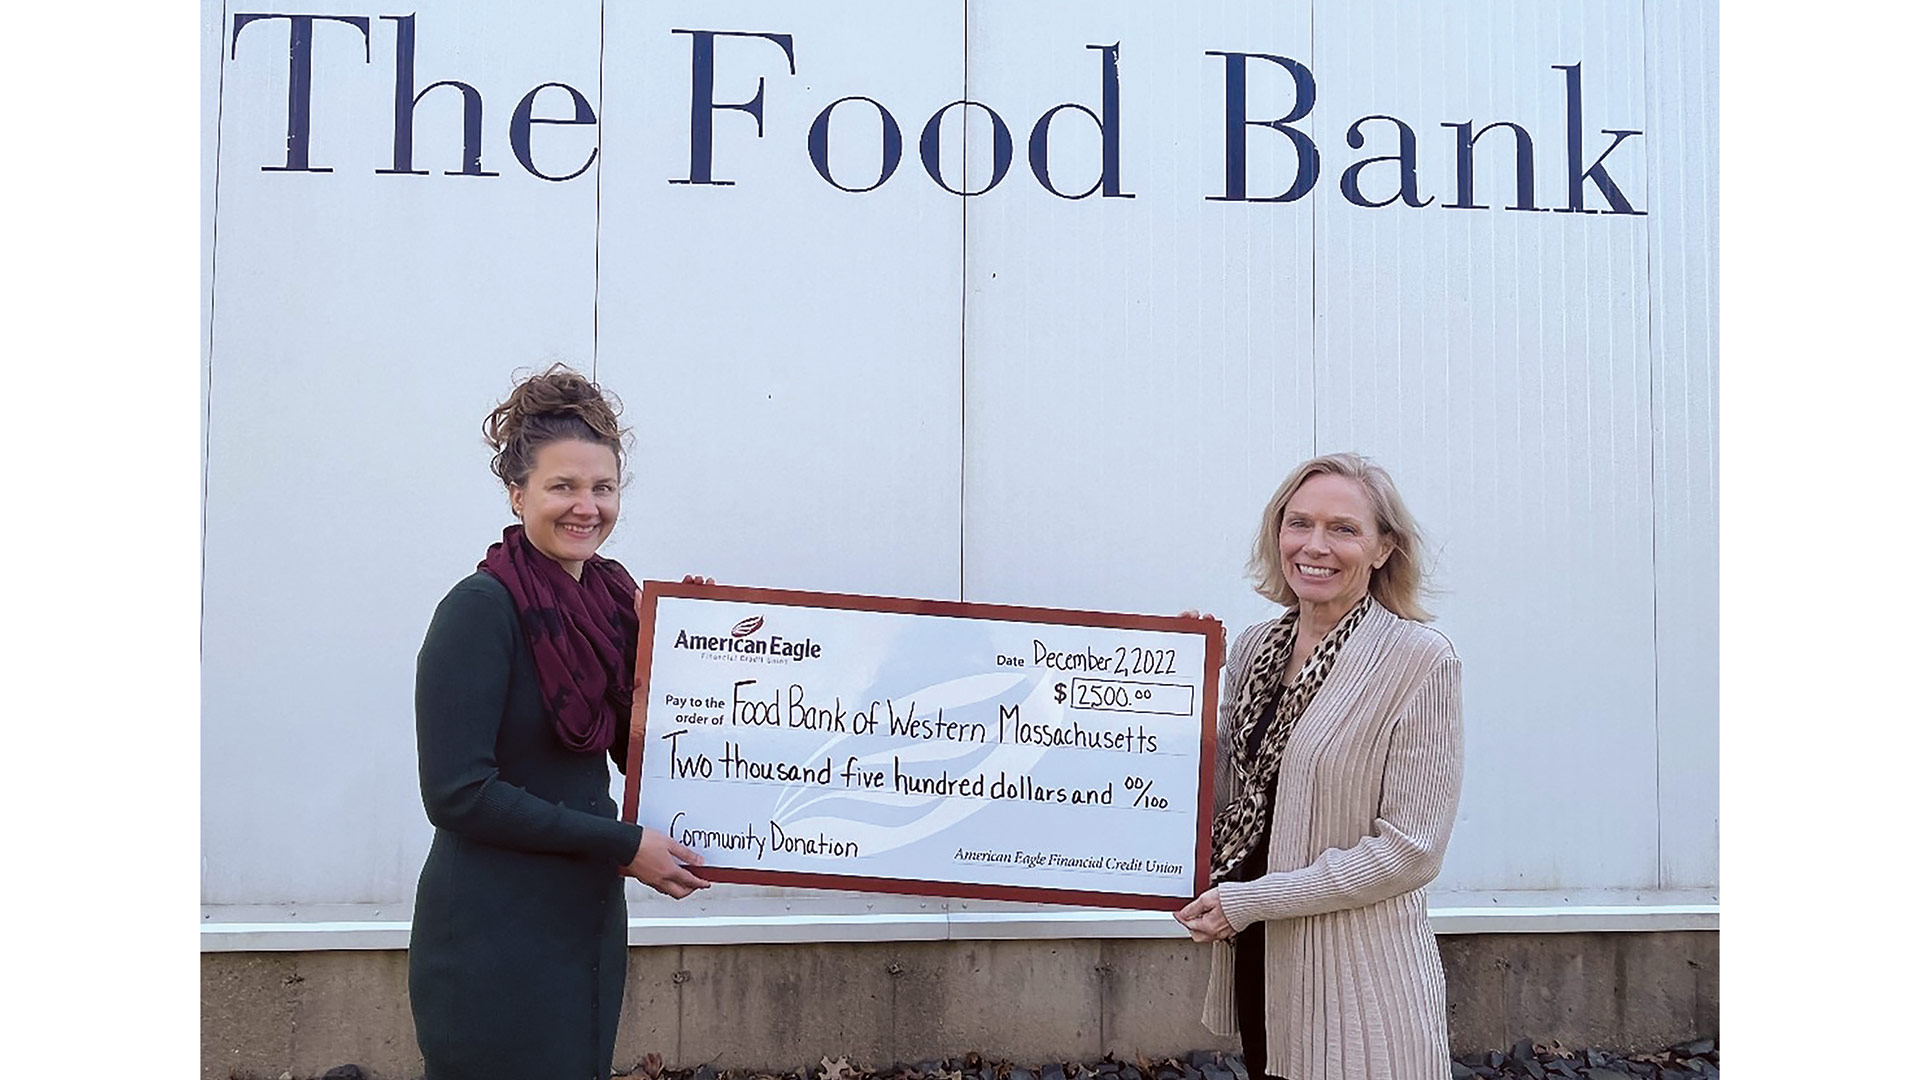 Pictured: Teresa Knox, COO of American Eagle Financial Credit Union (right), presents the $2,500 donation to Jillian Morgan, director of Philanthropy at the Food Bank of Western Massachusetts.